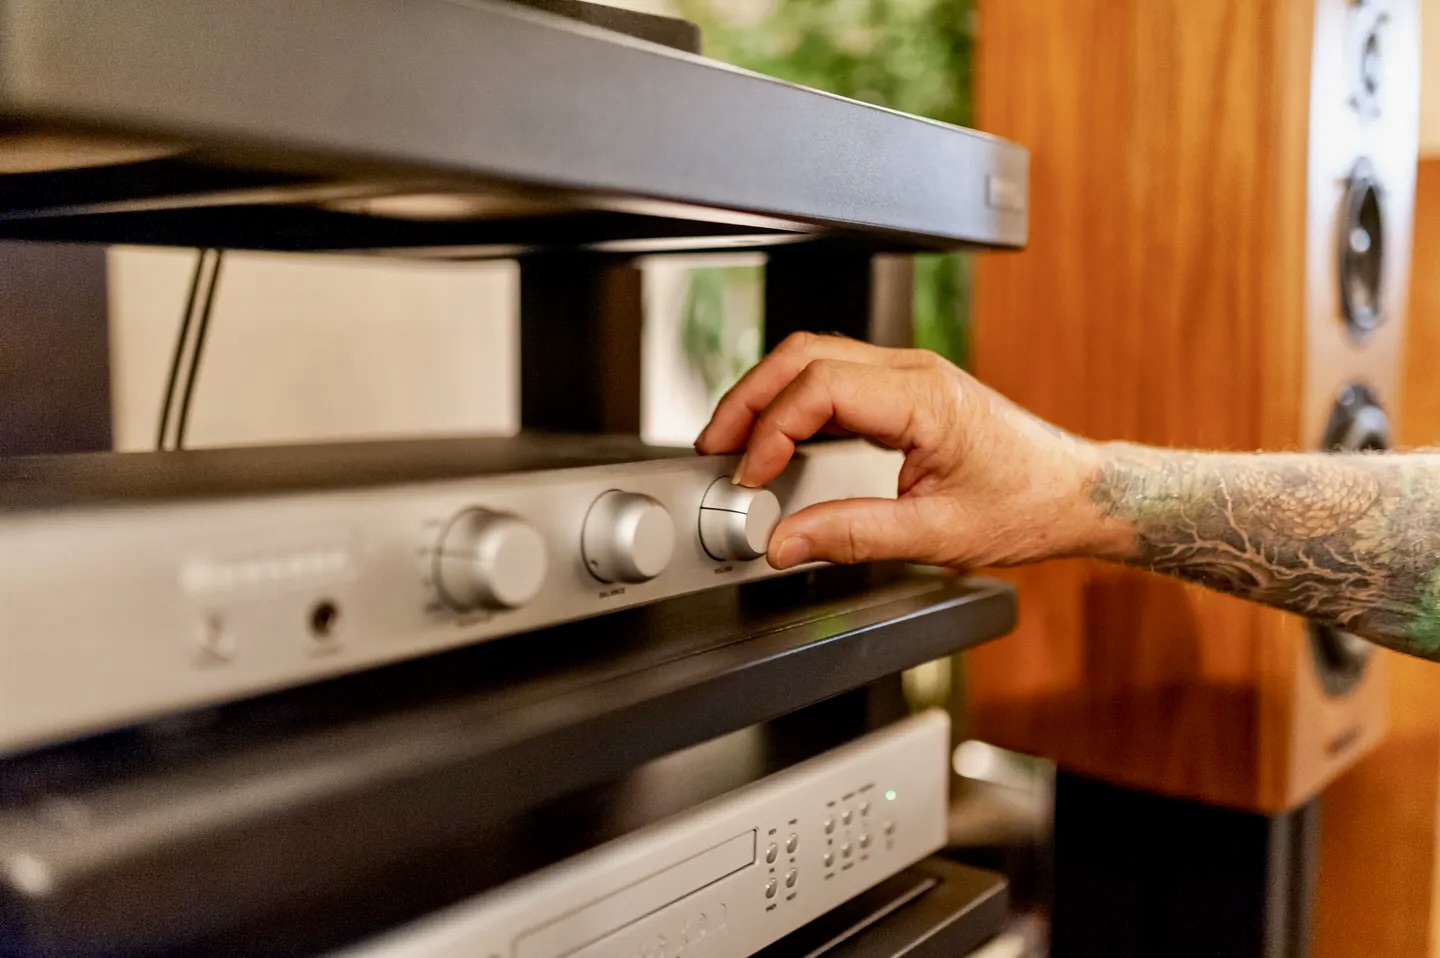 A person is adjusting the volume on an oven.